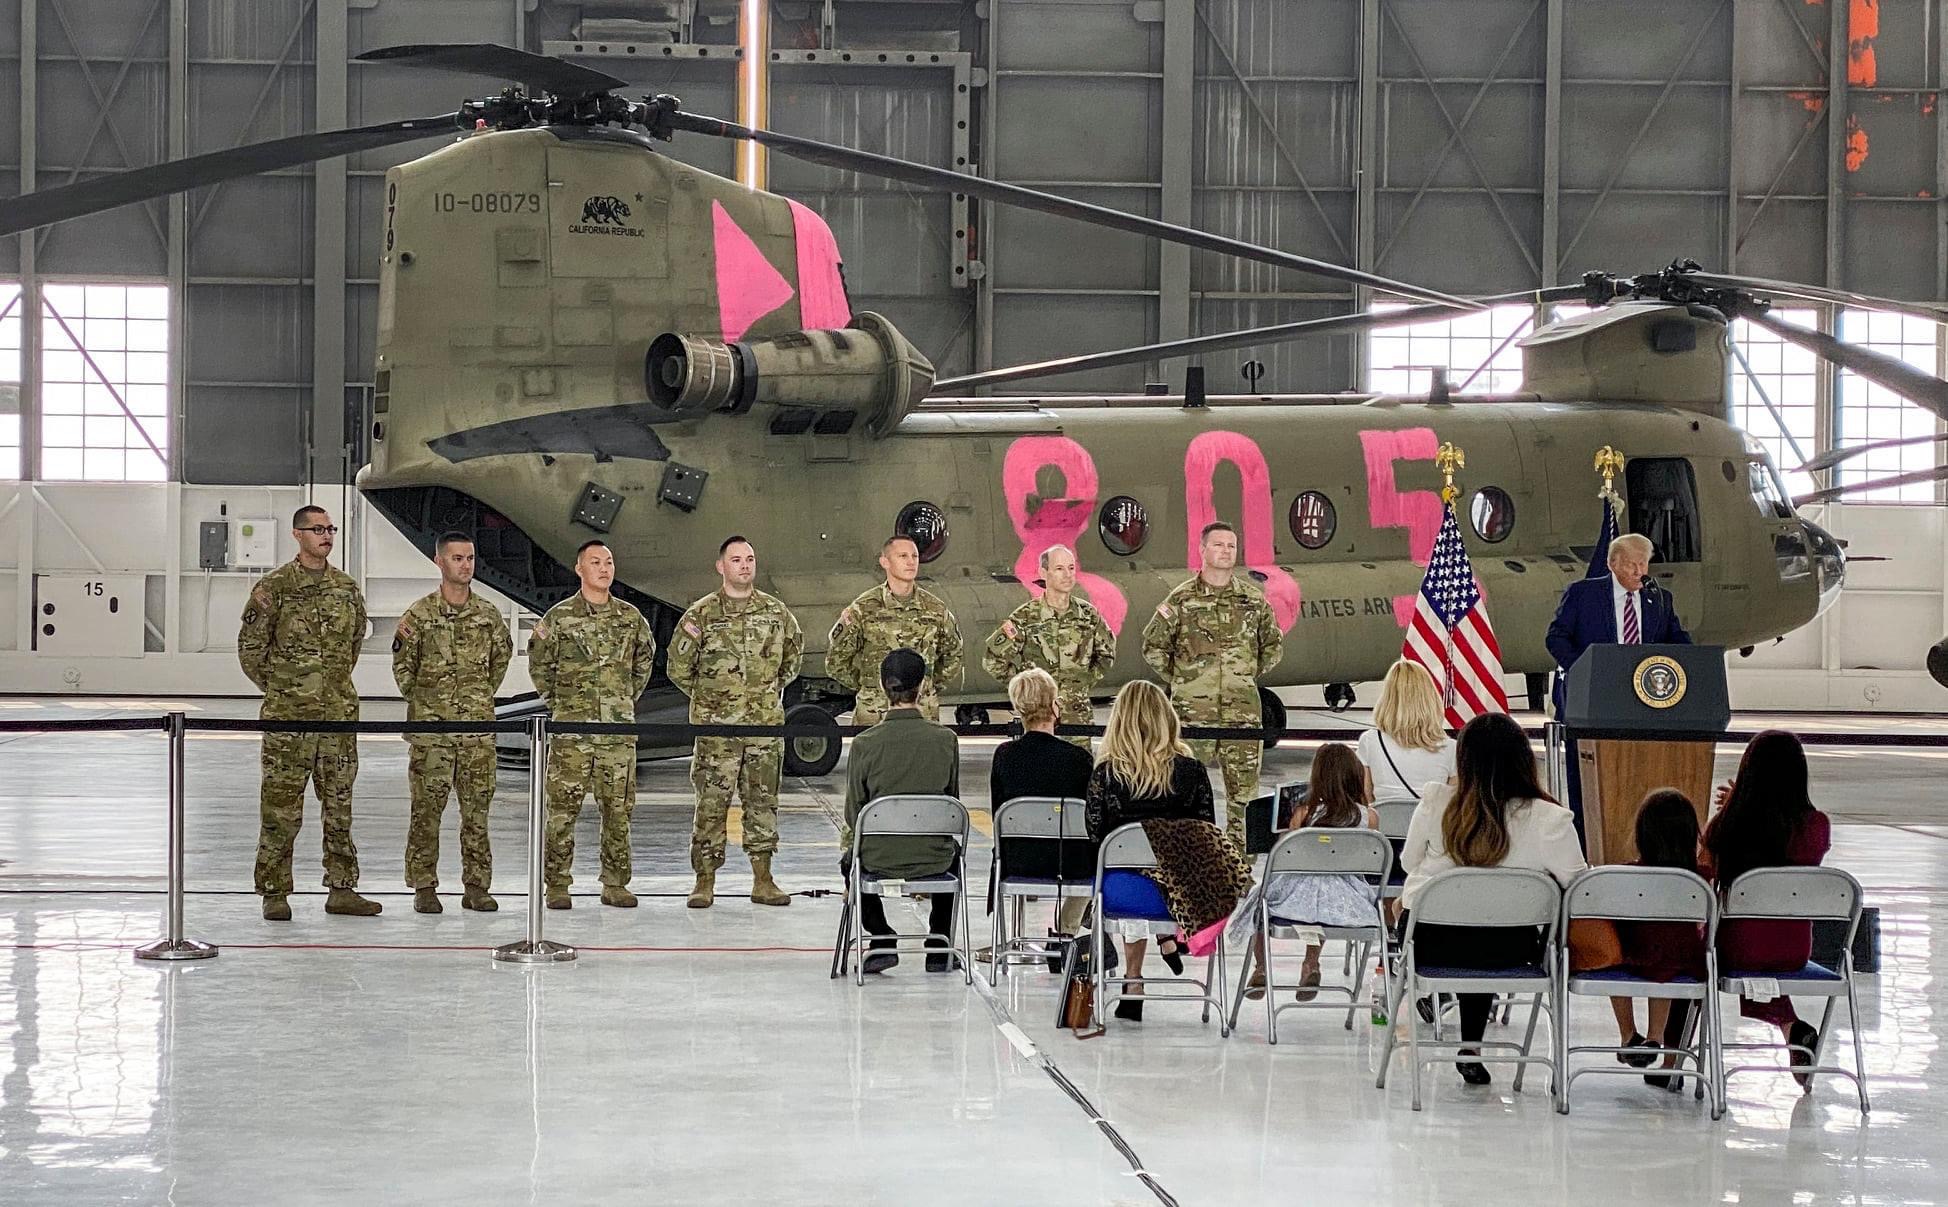 Inside a large hanger, a small crowd looks on as seven members of the california army national guard in fatigues with a large banana helicopter in the background as then president trump stands at a presidential podium giving a speech